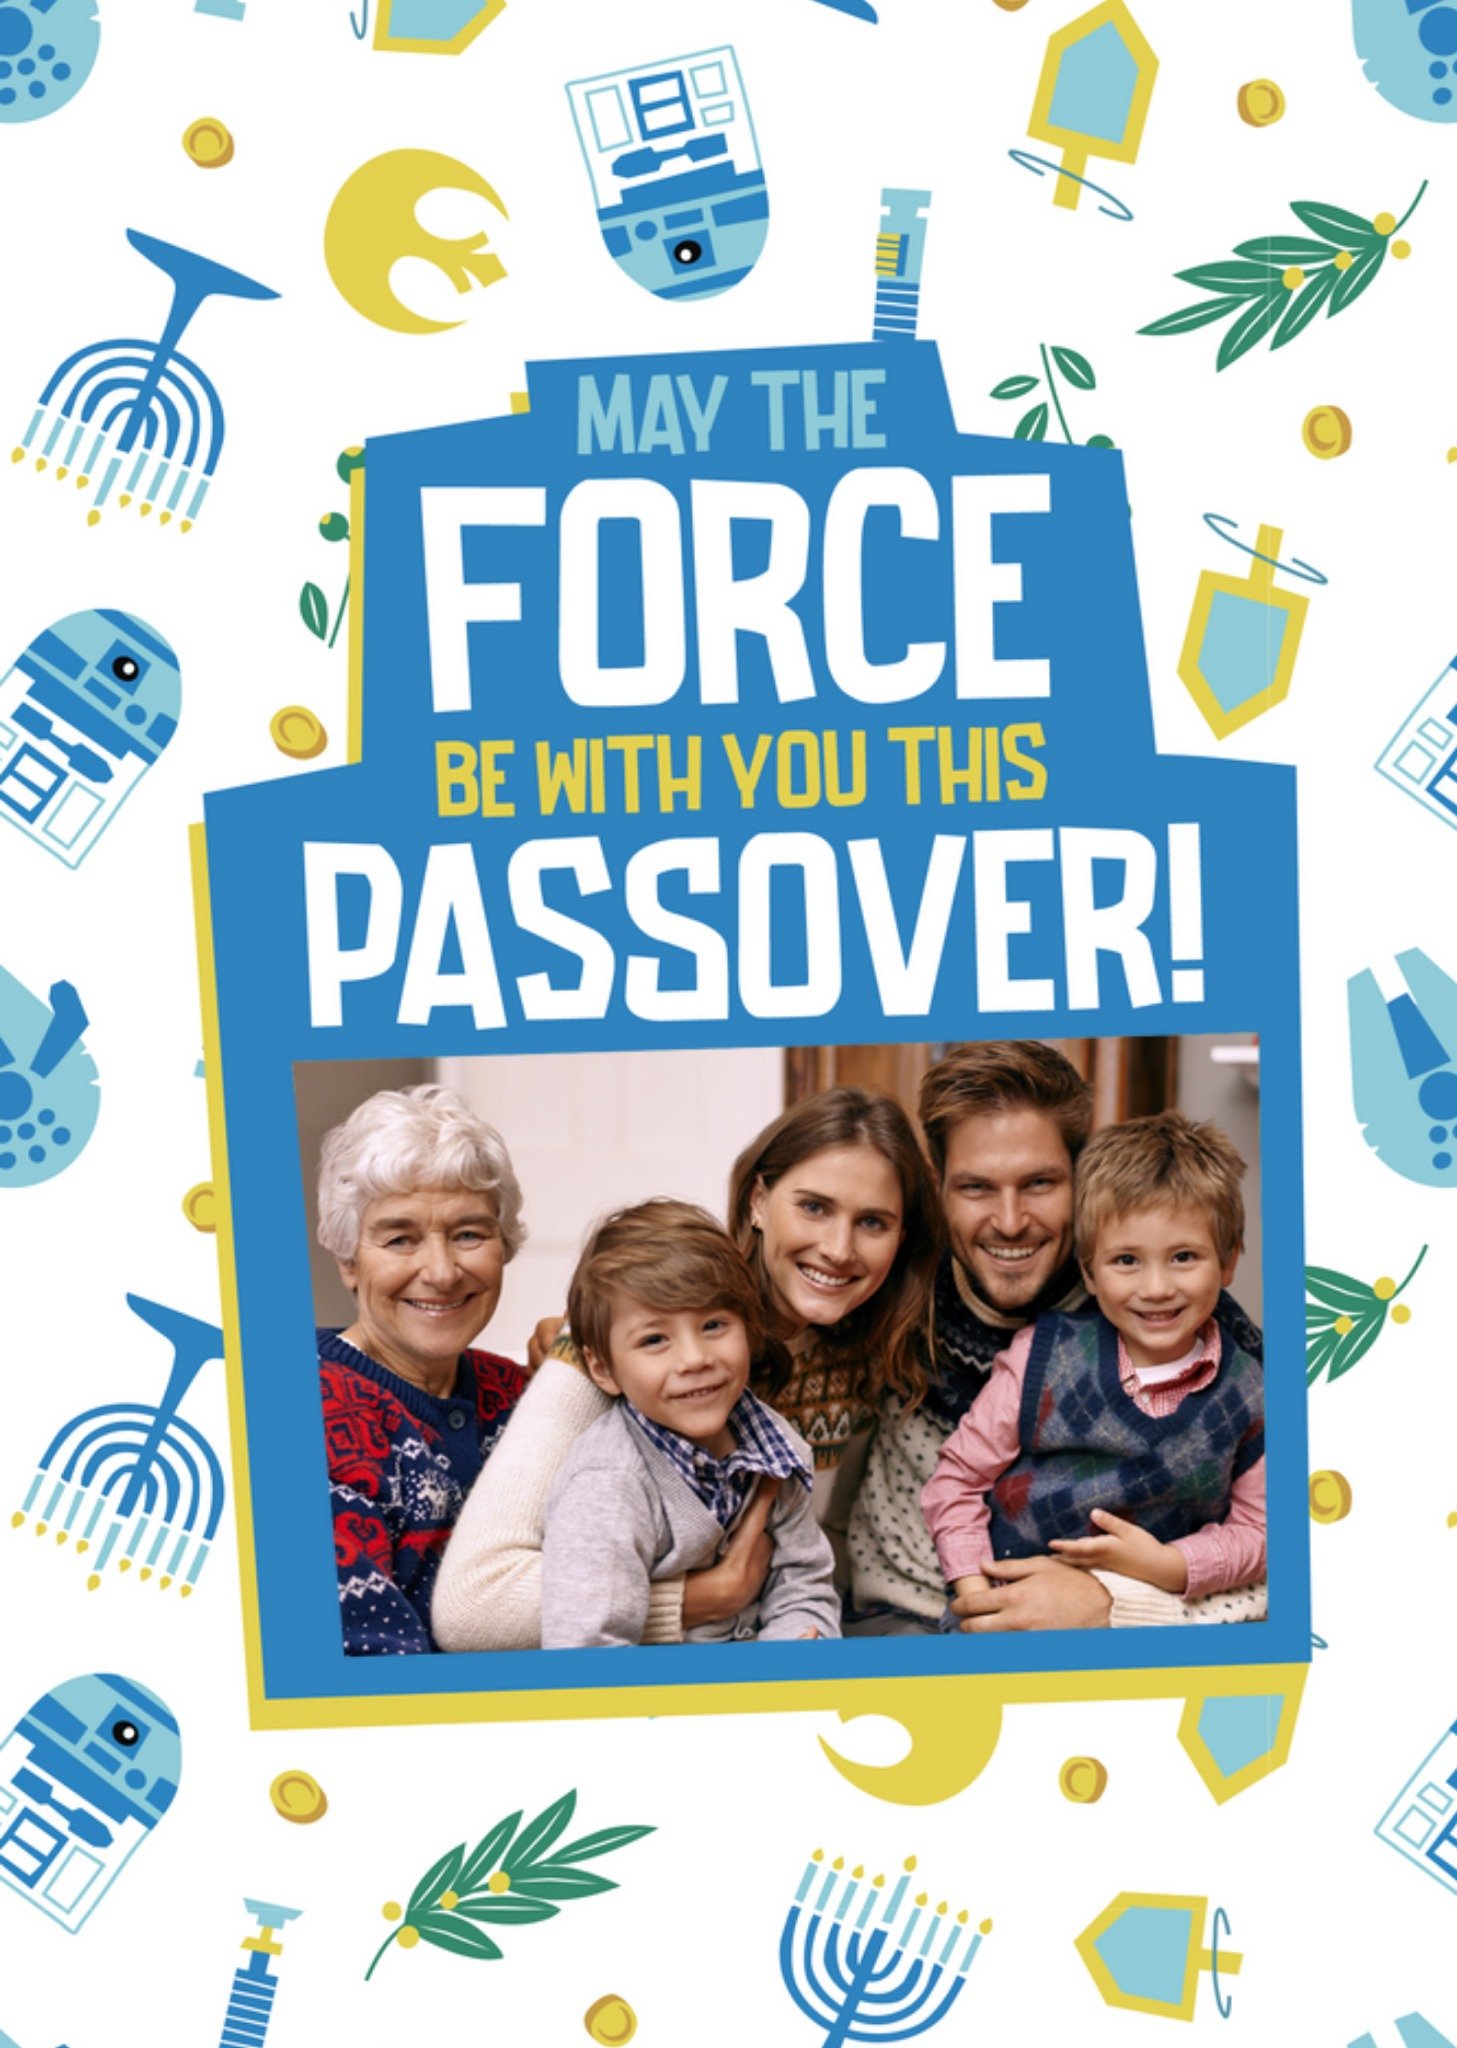 Disney Star Wars May The Force Be With You This Passover Photo Upload Passover Card Ecard